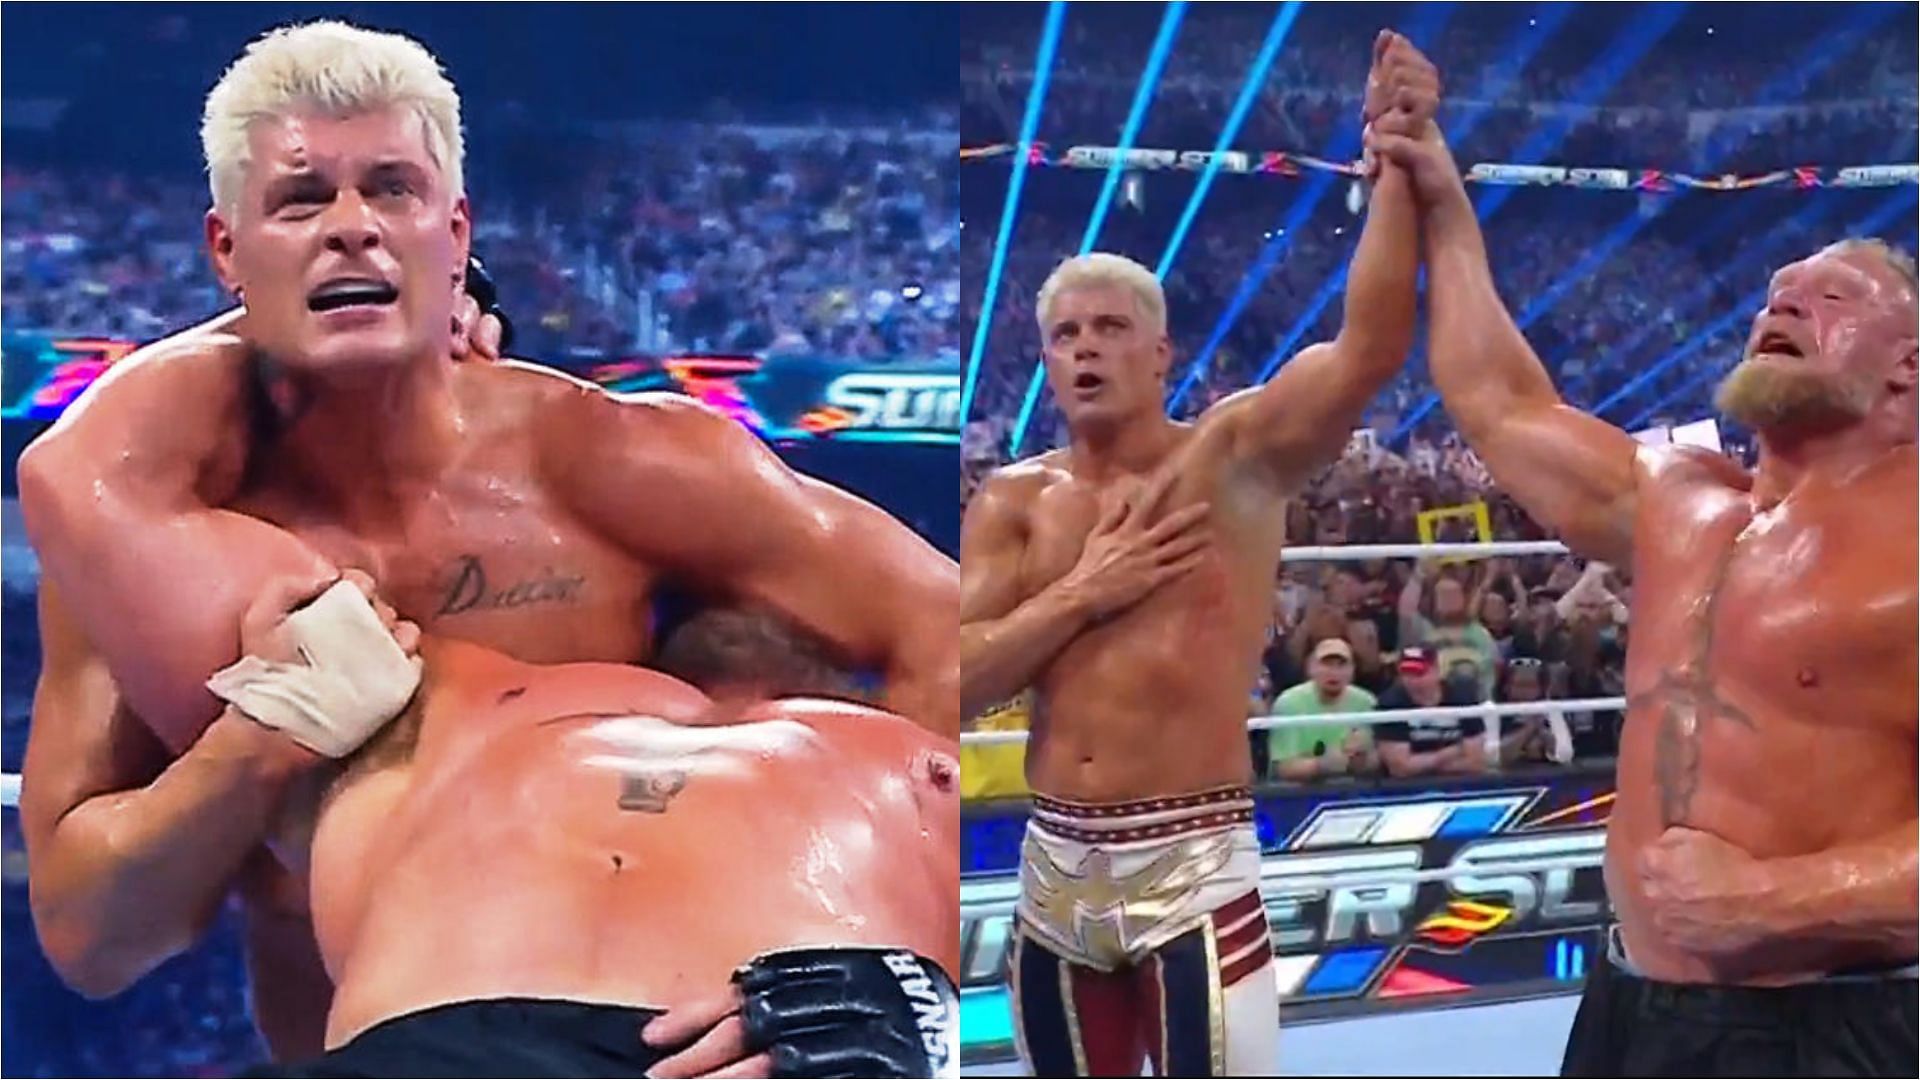 What next for the American Nightmare after overcoming the mountain that is Brock Lesnar?